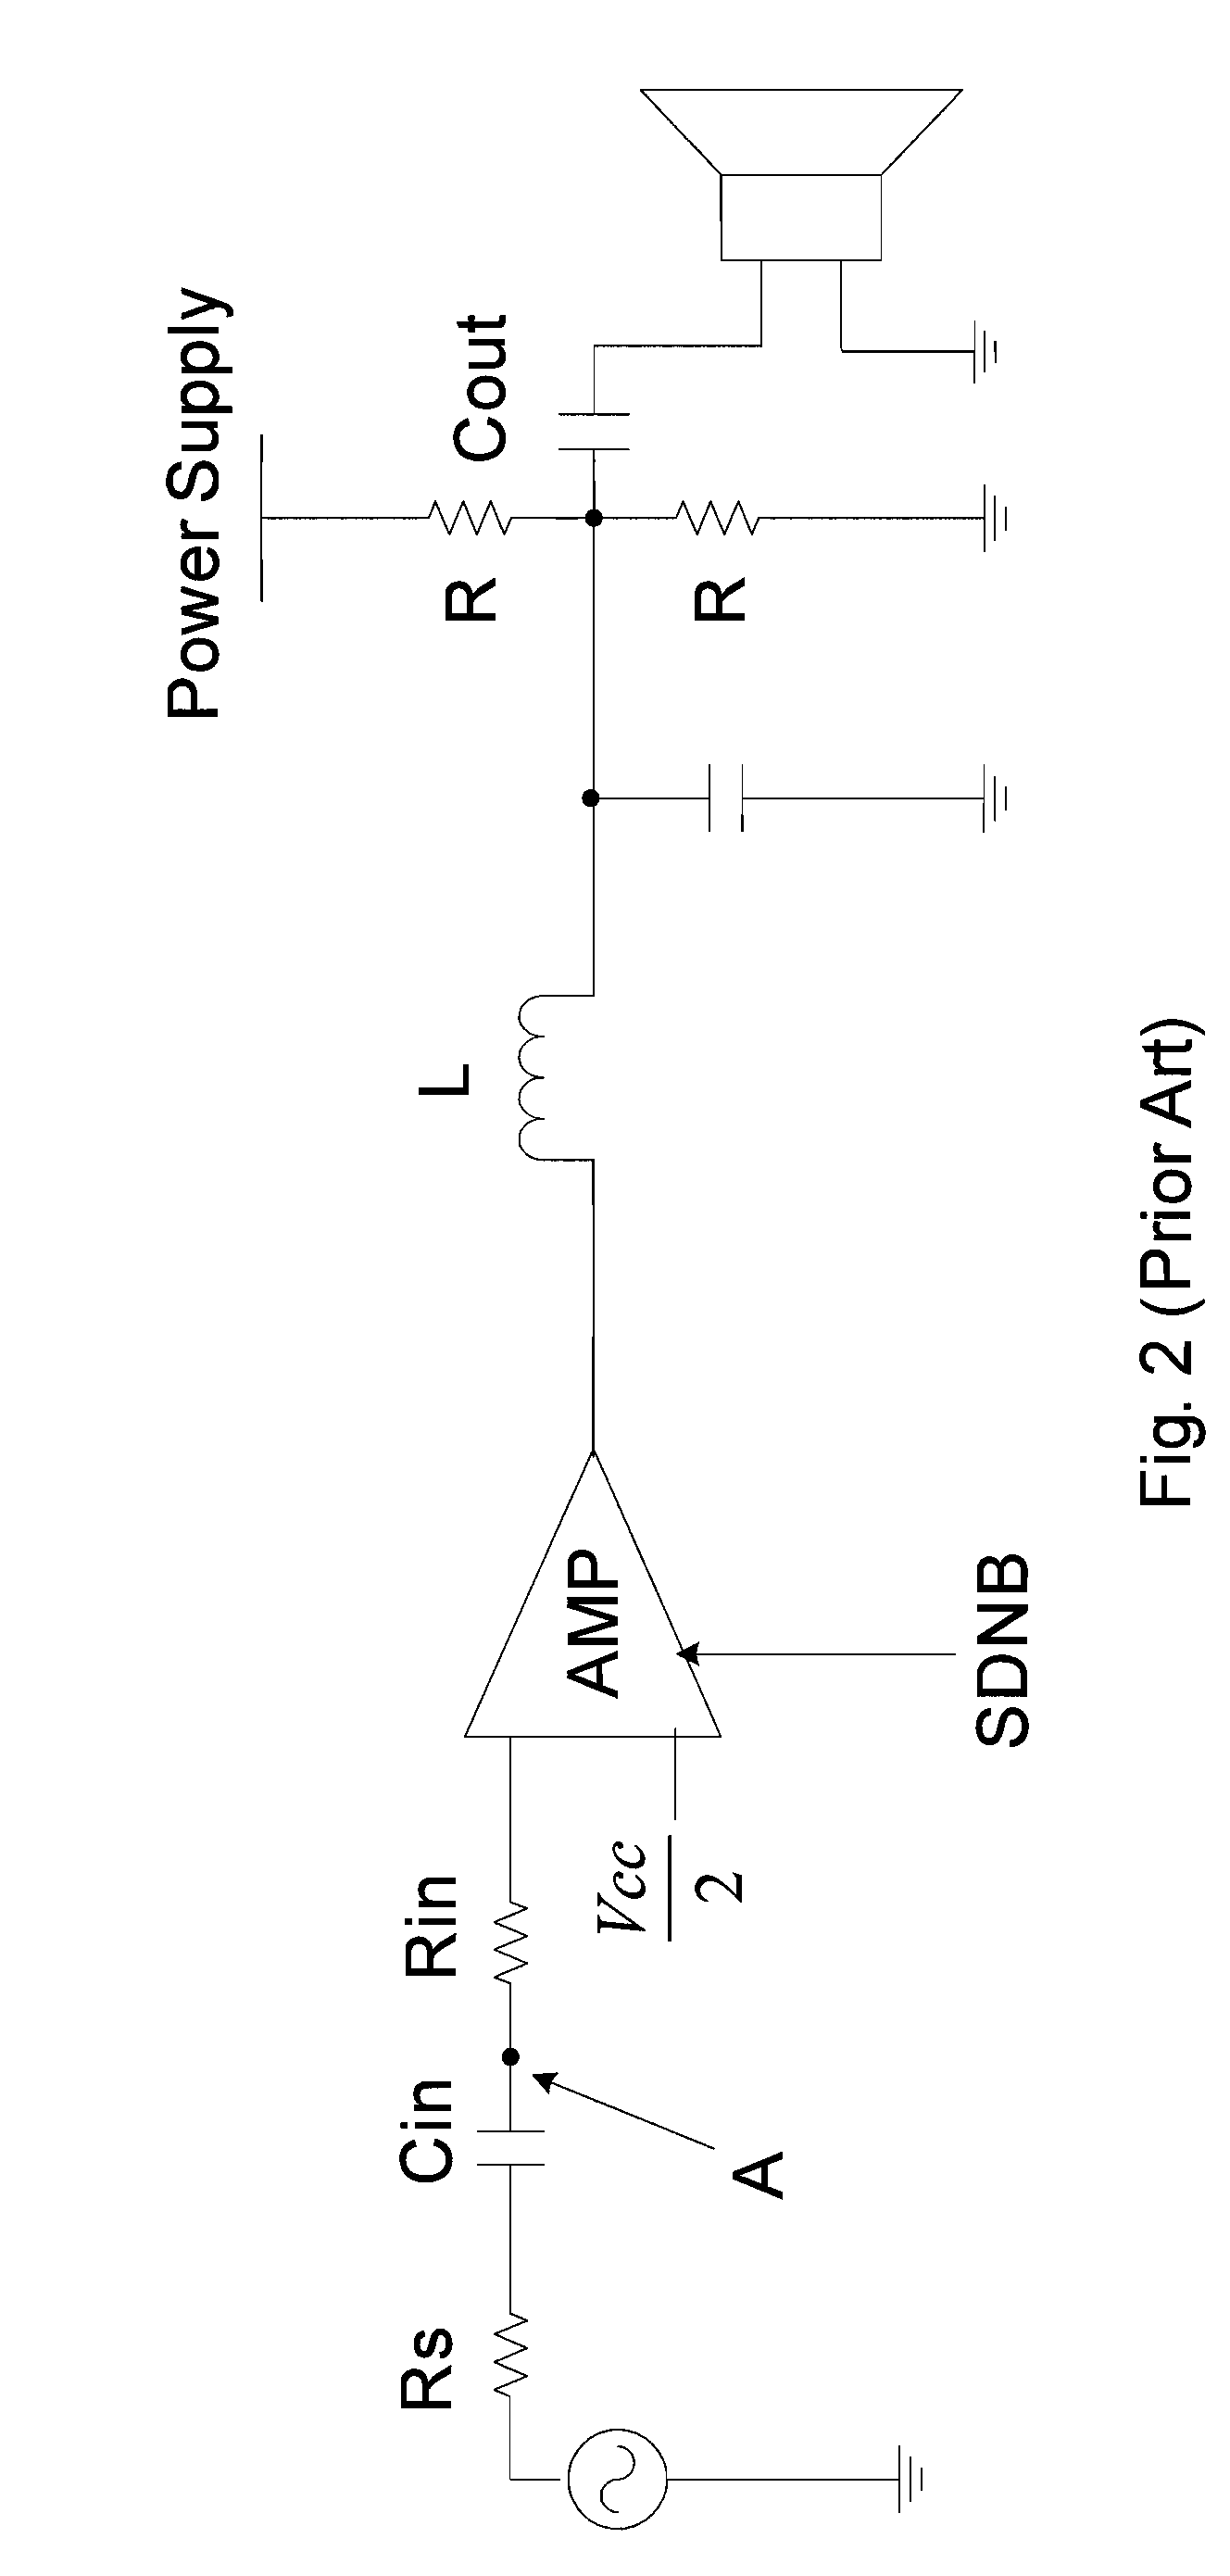 Circuit and method for eliminating speaker crackle during turning on or off power amplifier